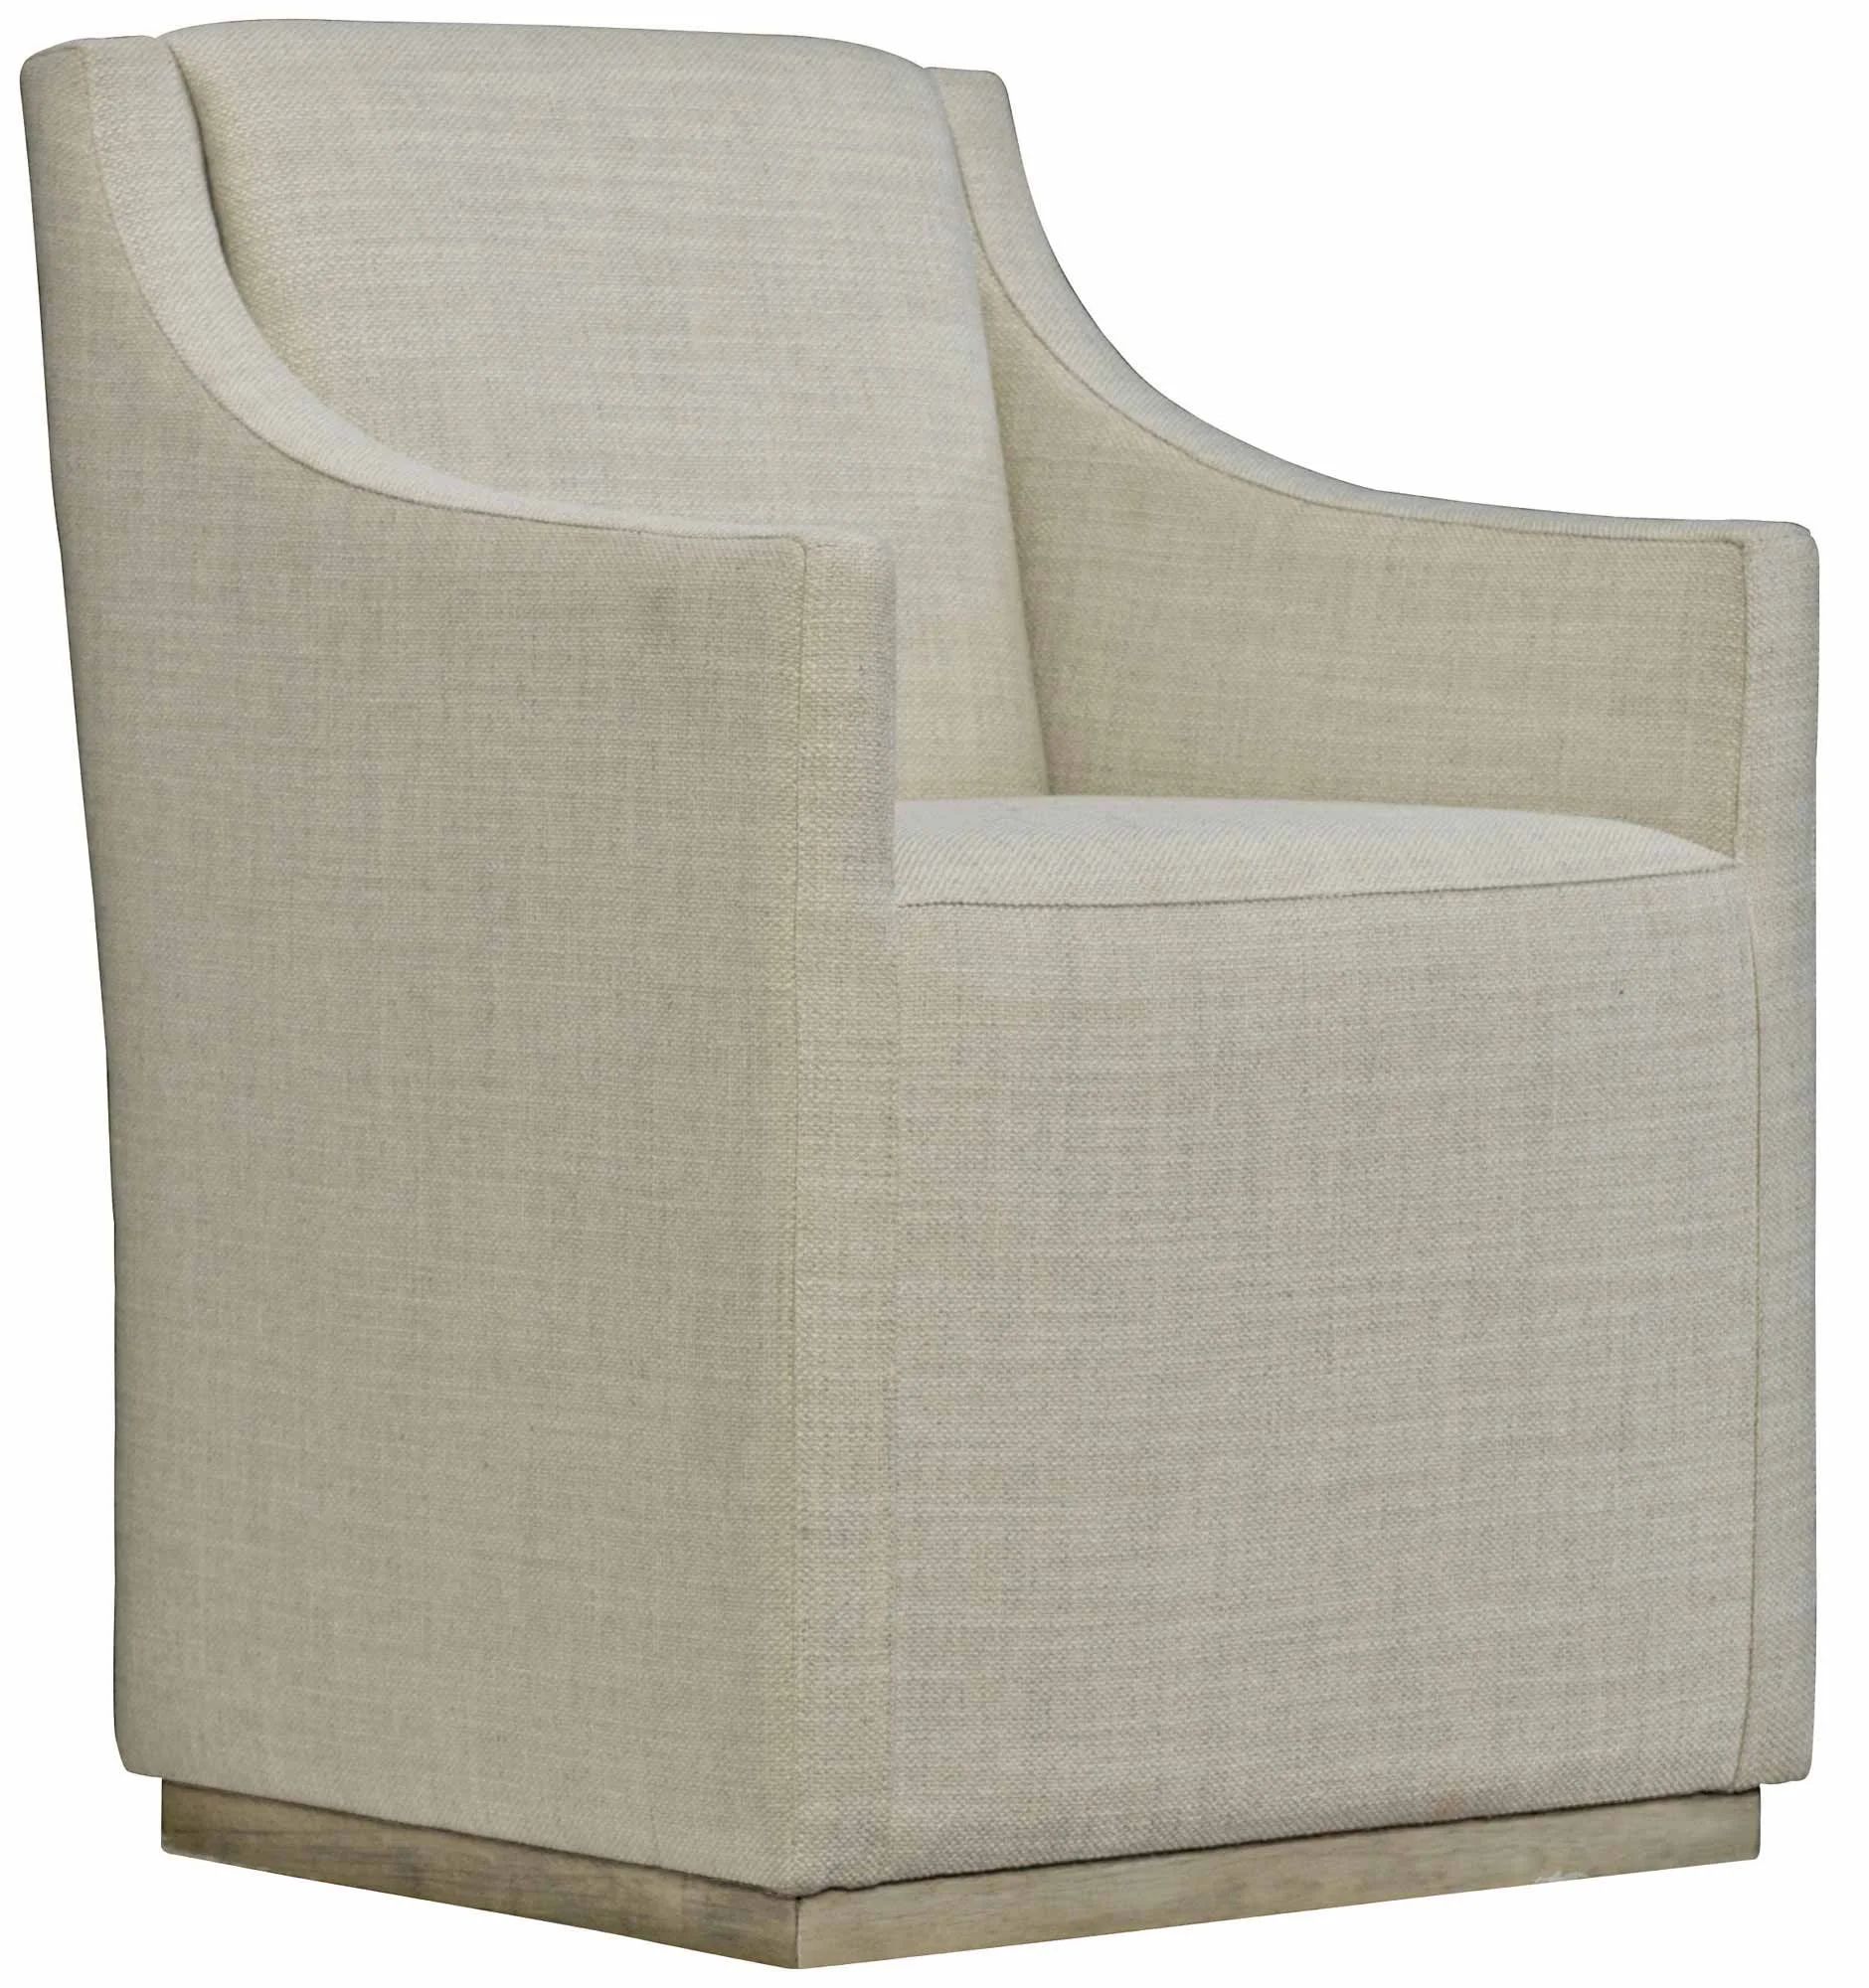 Highland Park Upholstered Wingback Arm Chair in Sand | Wayfair Professional